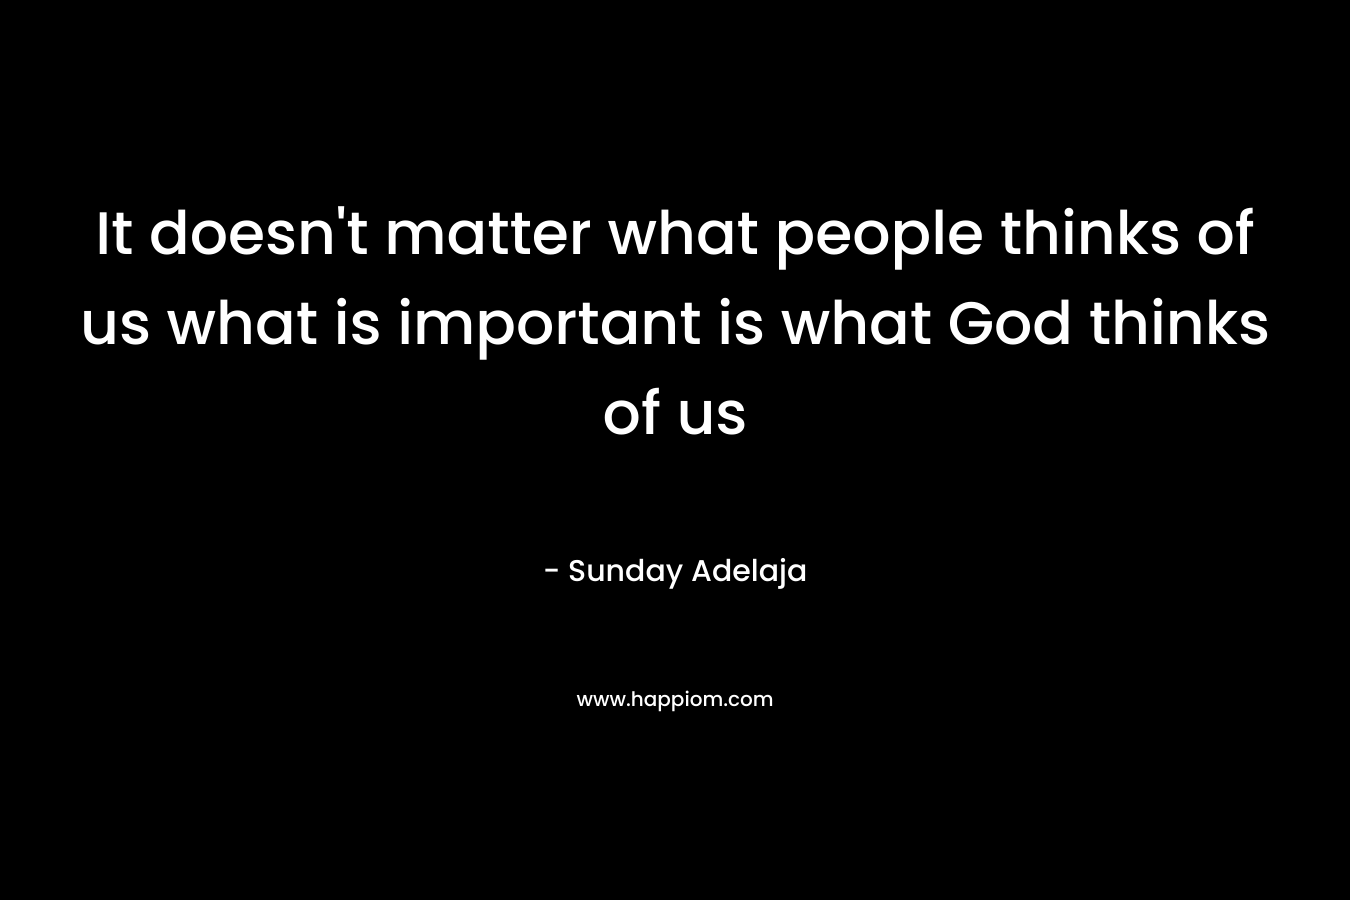 It doesn't matter what people thinks of us what is important is what God thinks of us